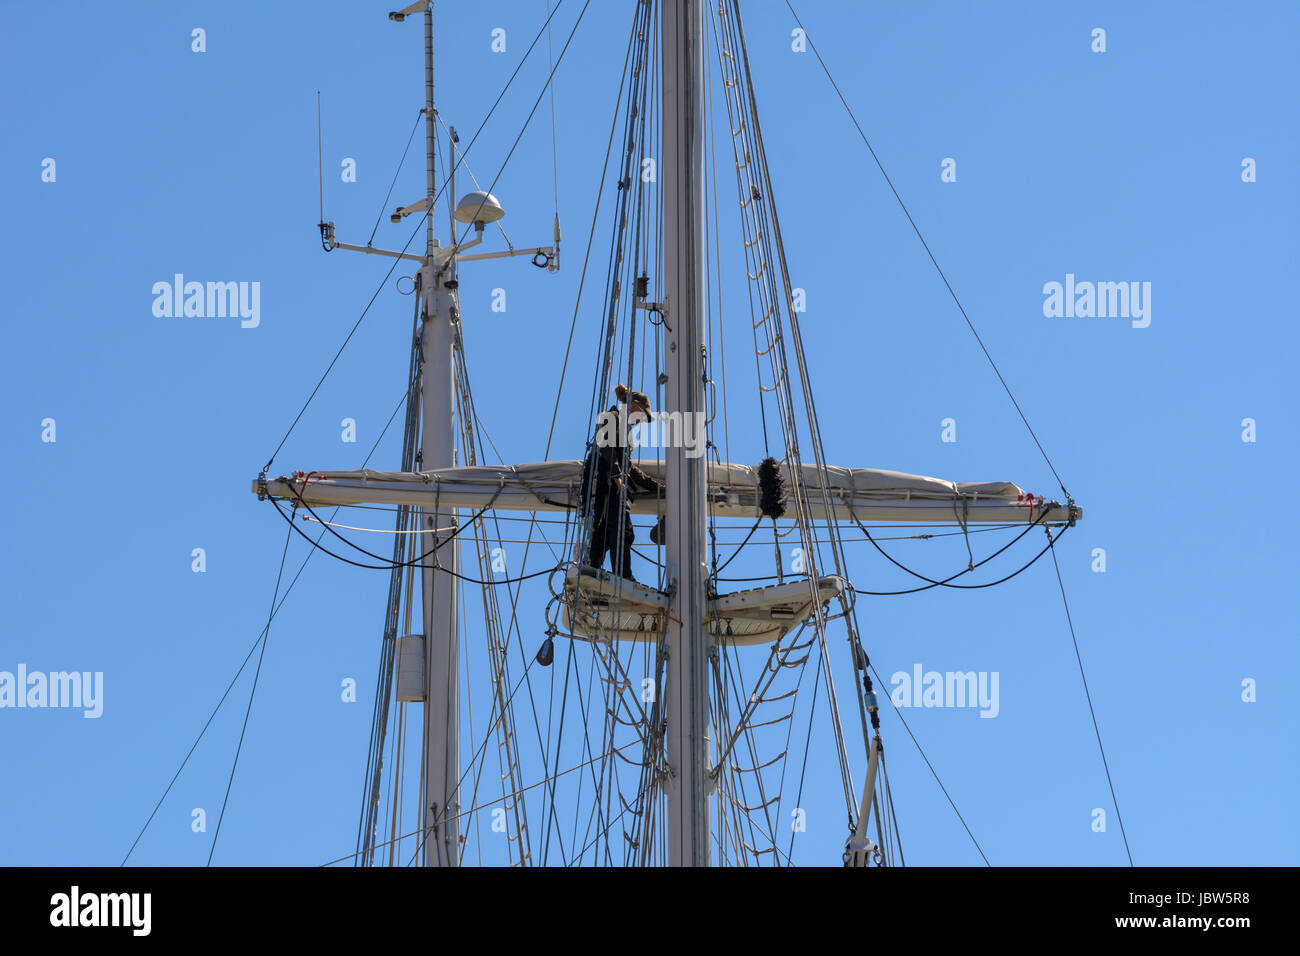 A female sailor works on the rigging high up on a yacht mast in Weymouth Harbour, Weymouth, Dorset, England, UK Stock Photo